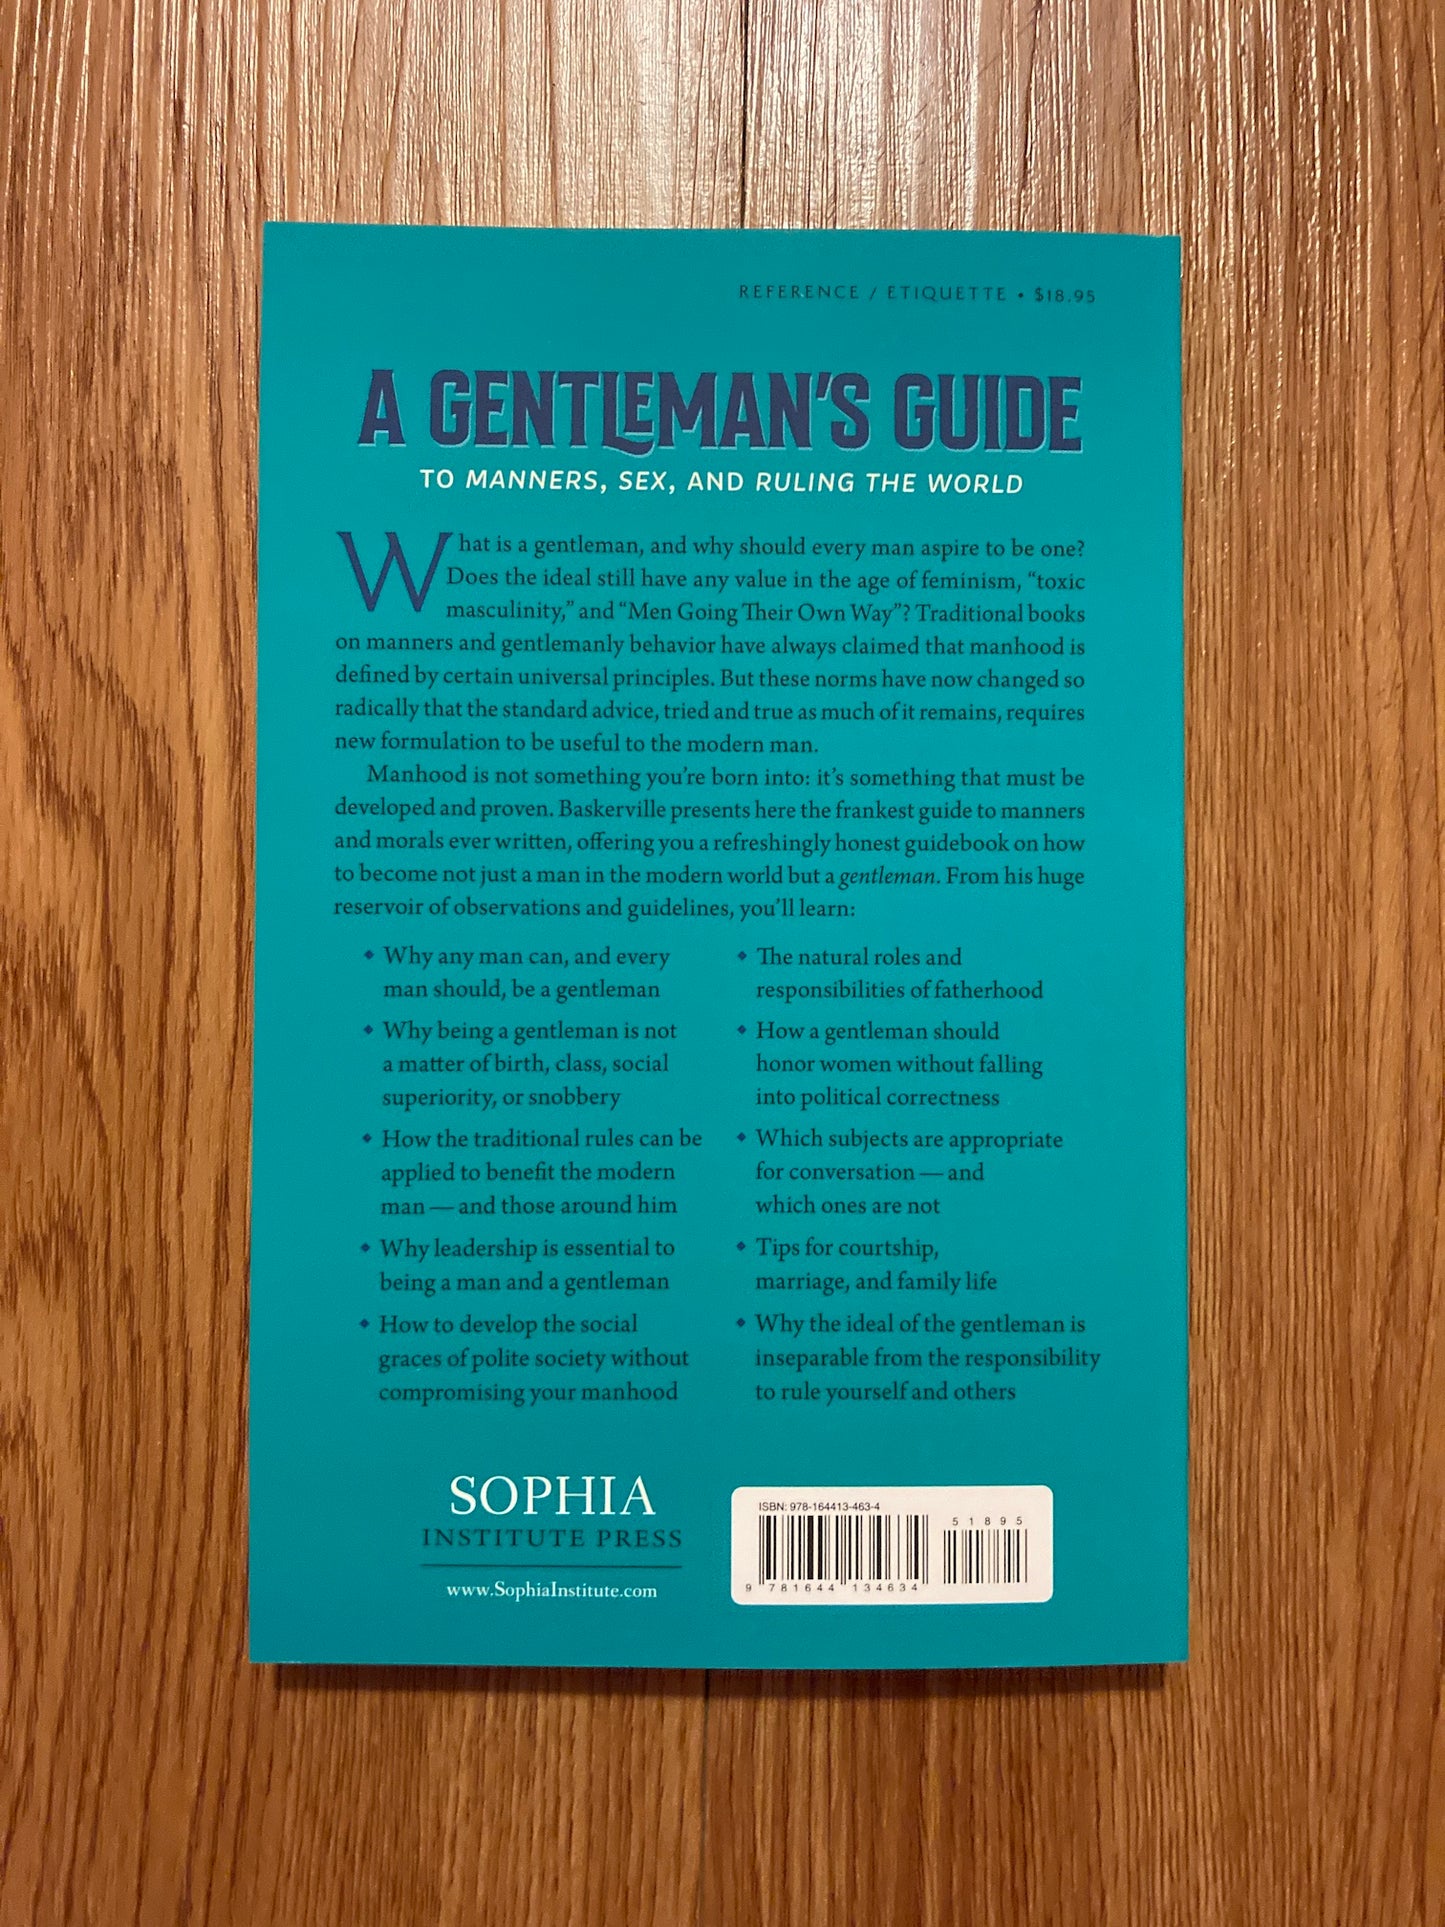 A Gentleman's Guide to Sex, Manners, and Ruling the World